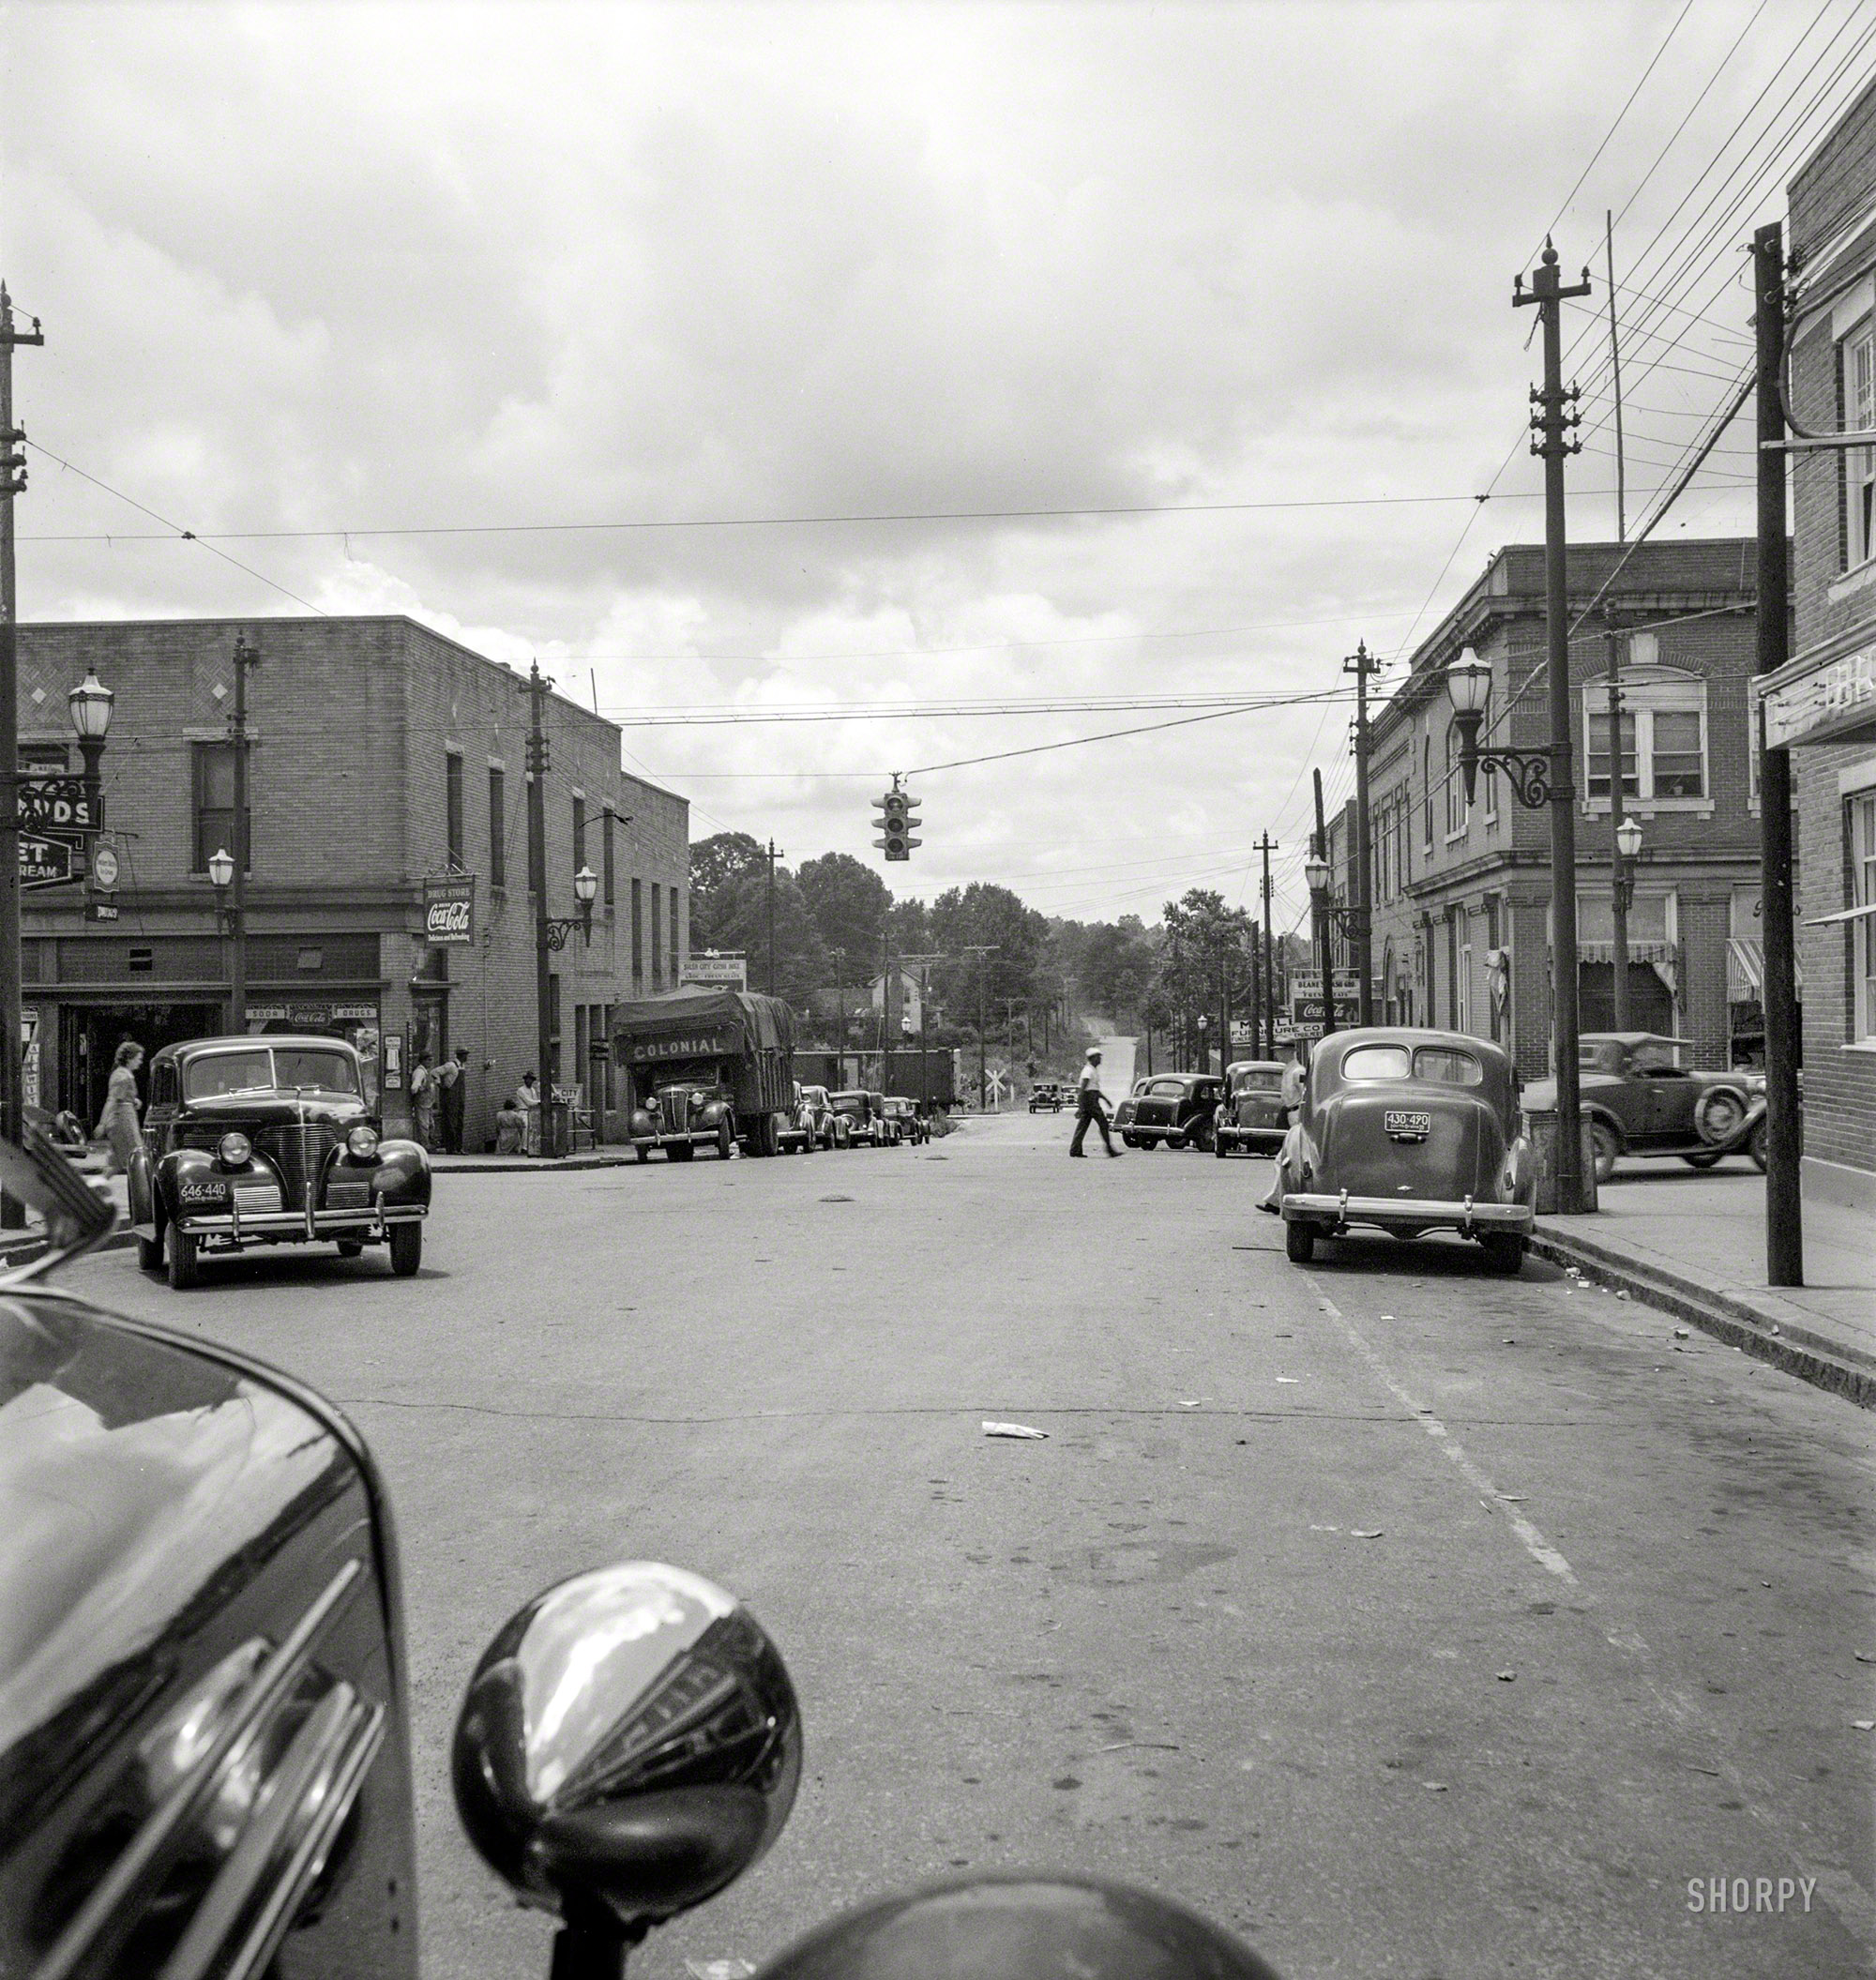 July 1939. "Siler City, North Carolina." Resting place of Aunt Bee. Photo by Dorothea Lange for the Farm Security Administration. View full size.